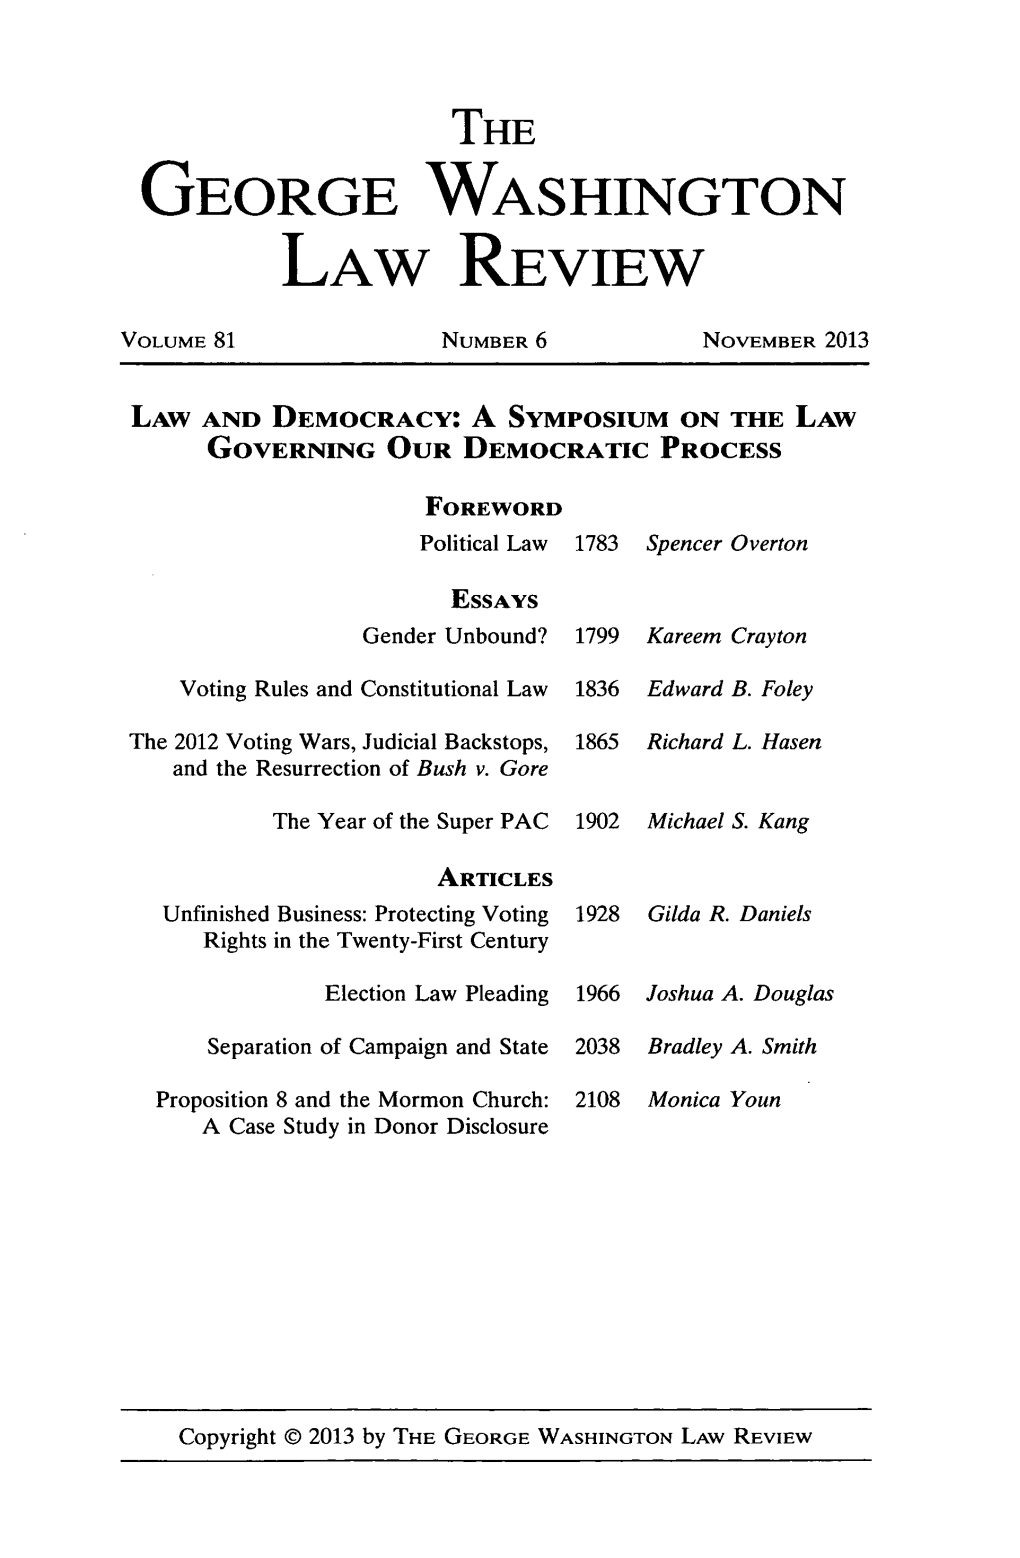 The George Washington Law Review